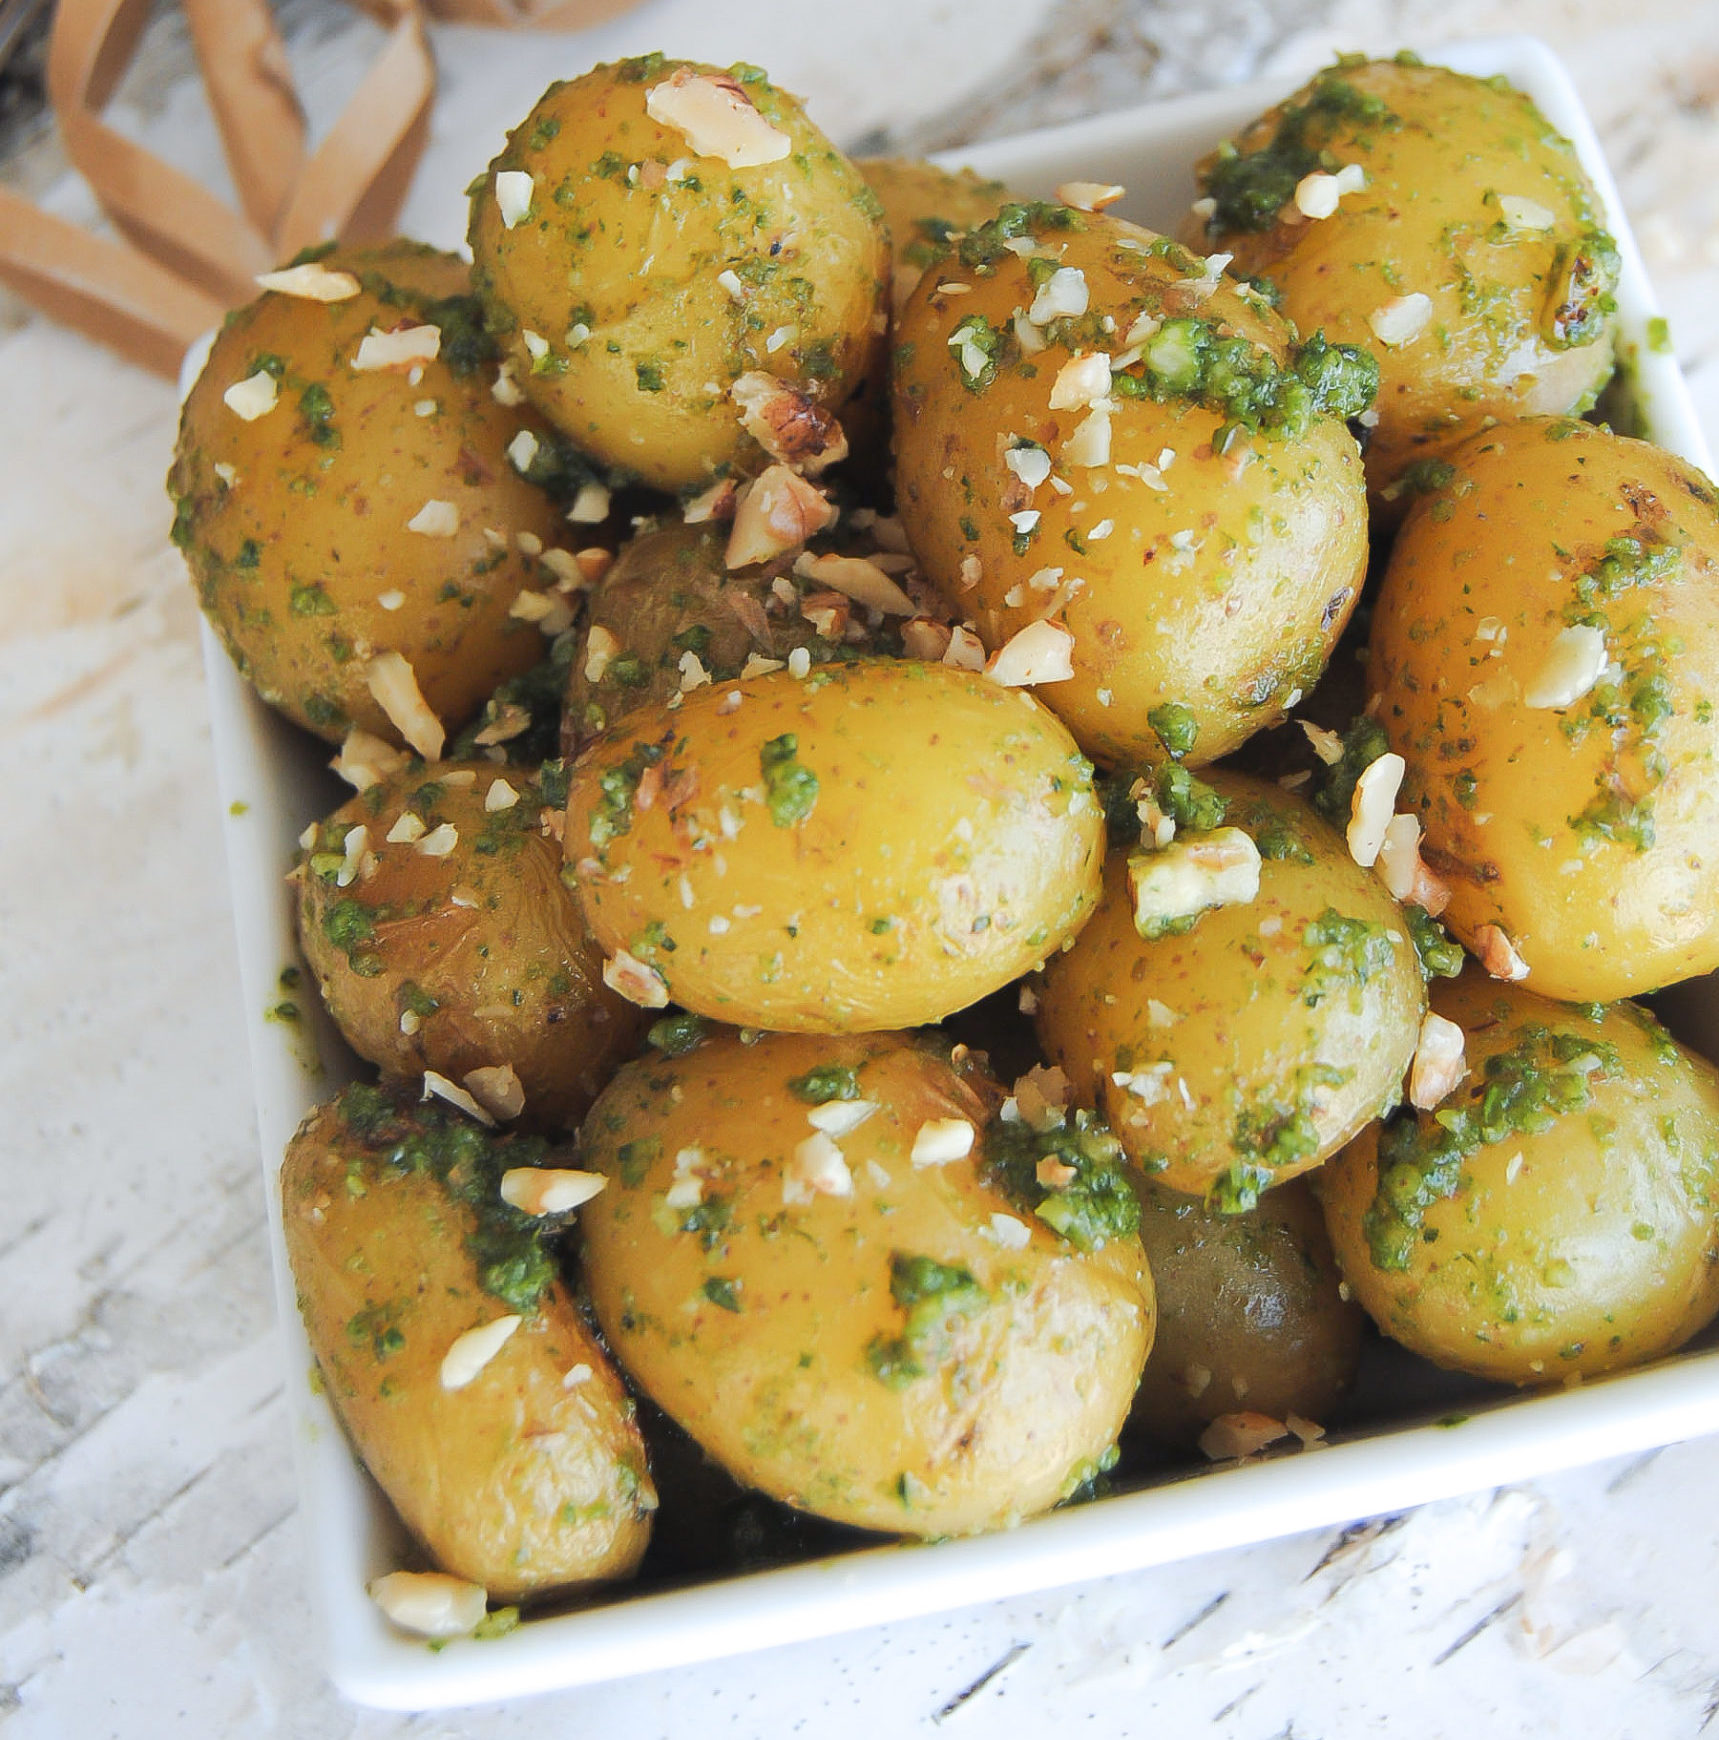 Roasted Potatoes With Pesto and Walnuts